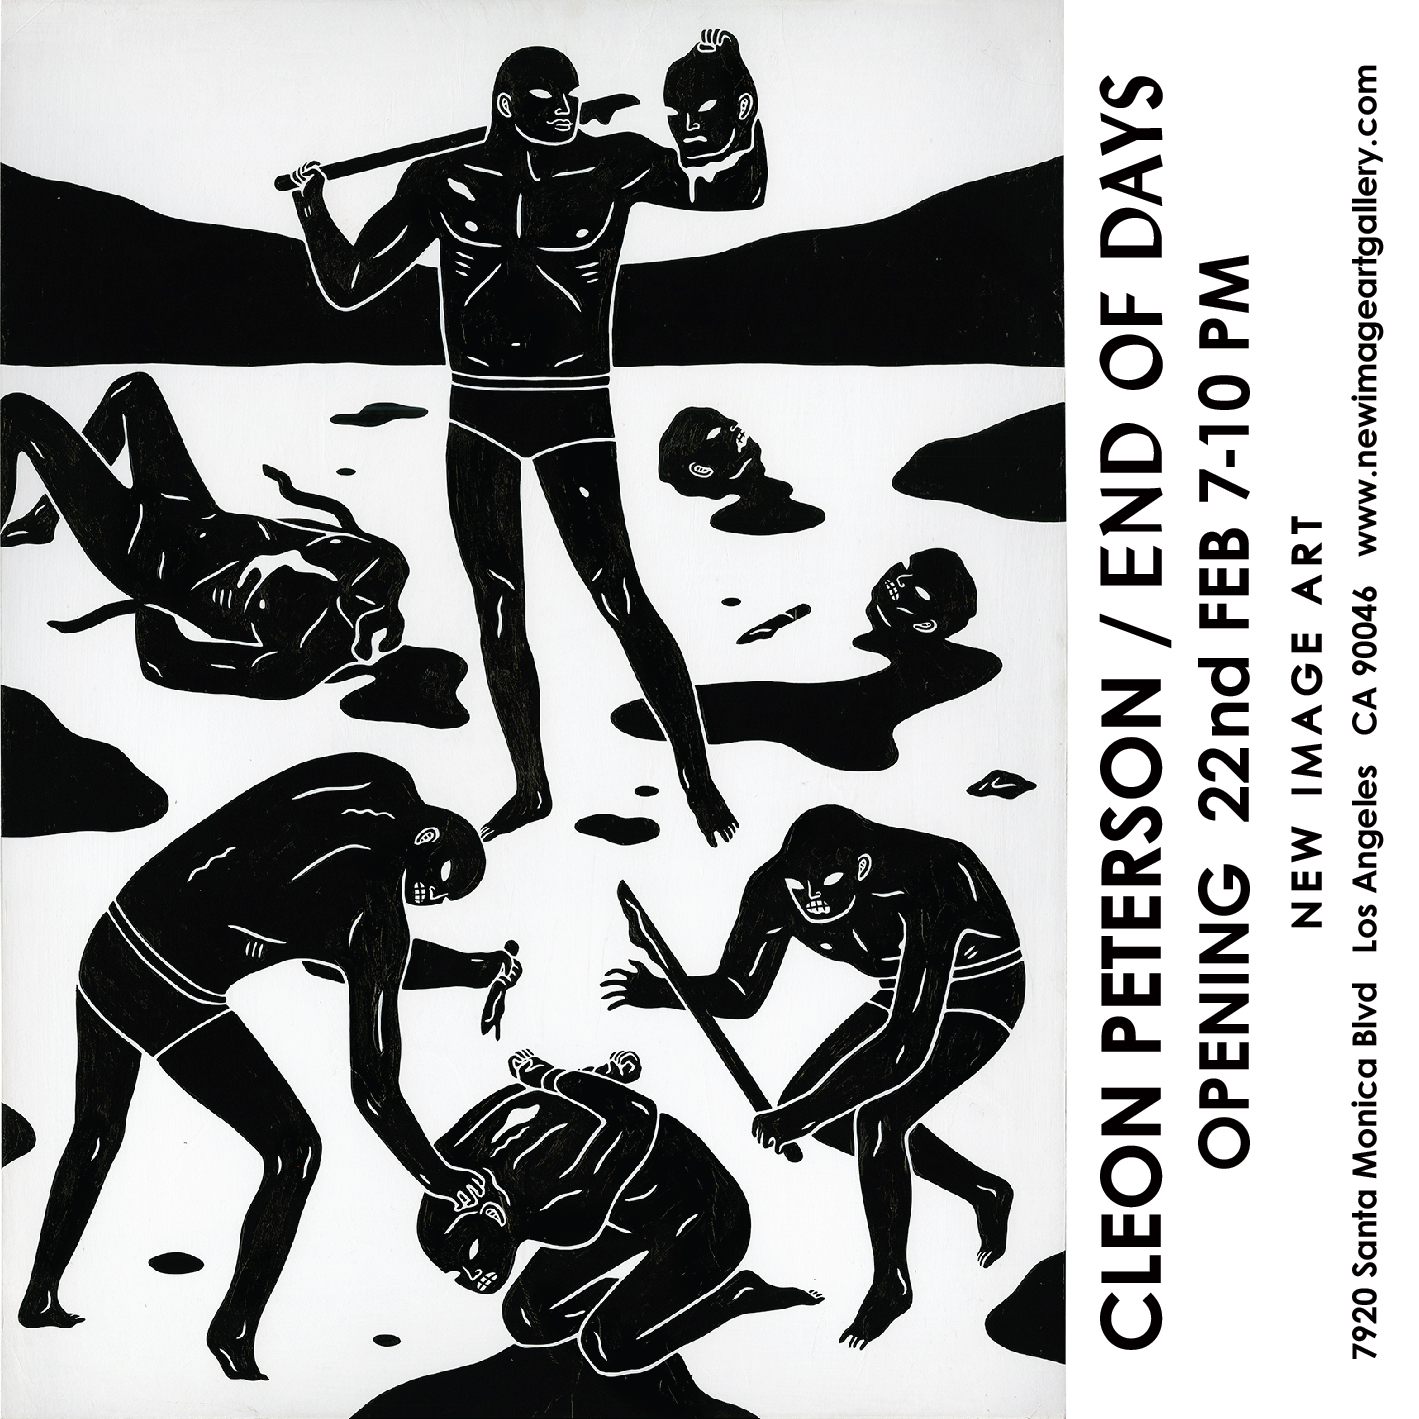 CLEON PETERSON - END OF DAYS